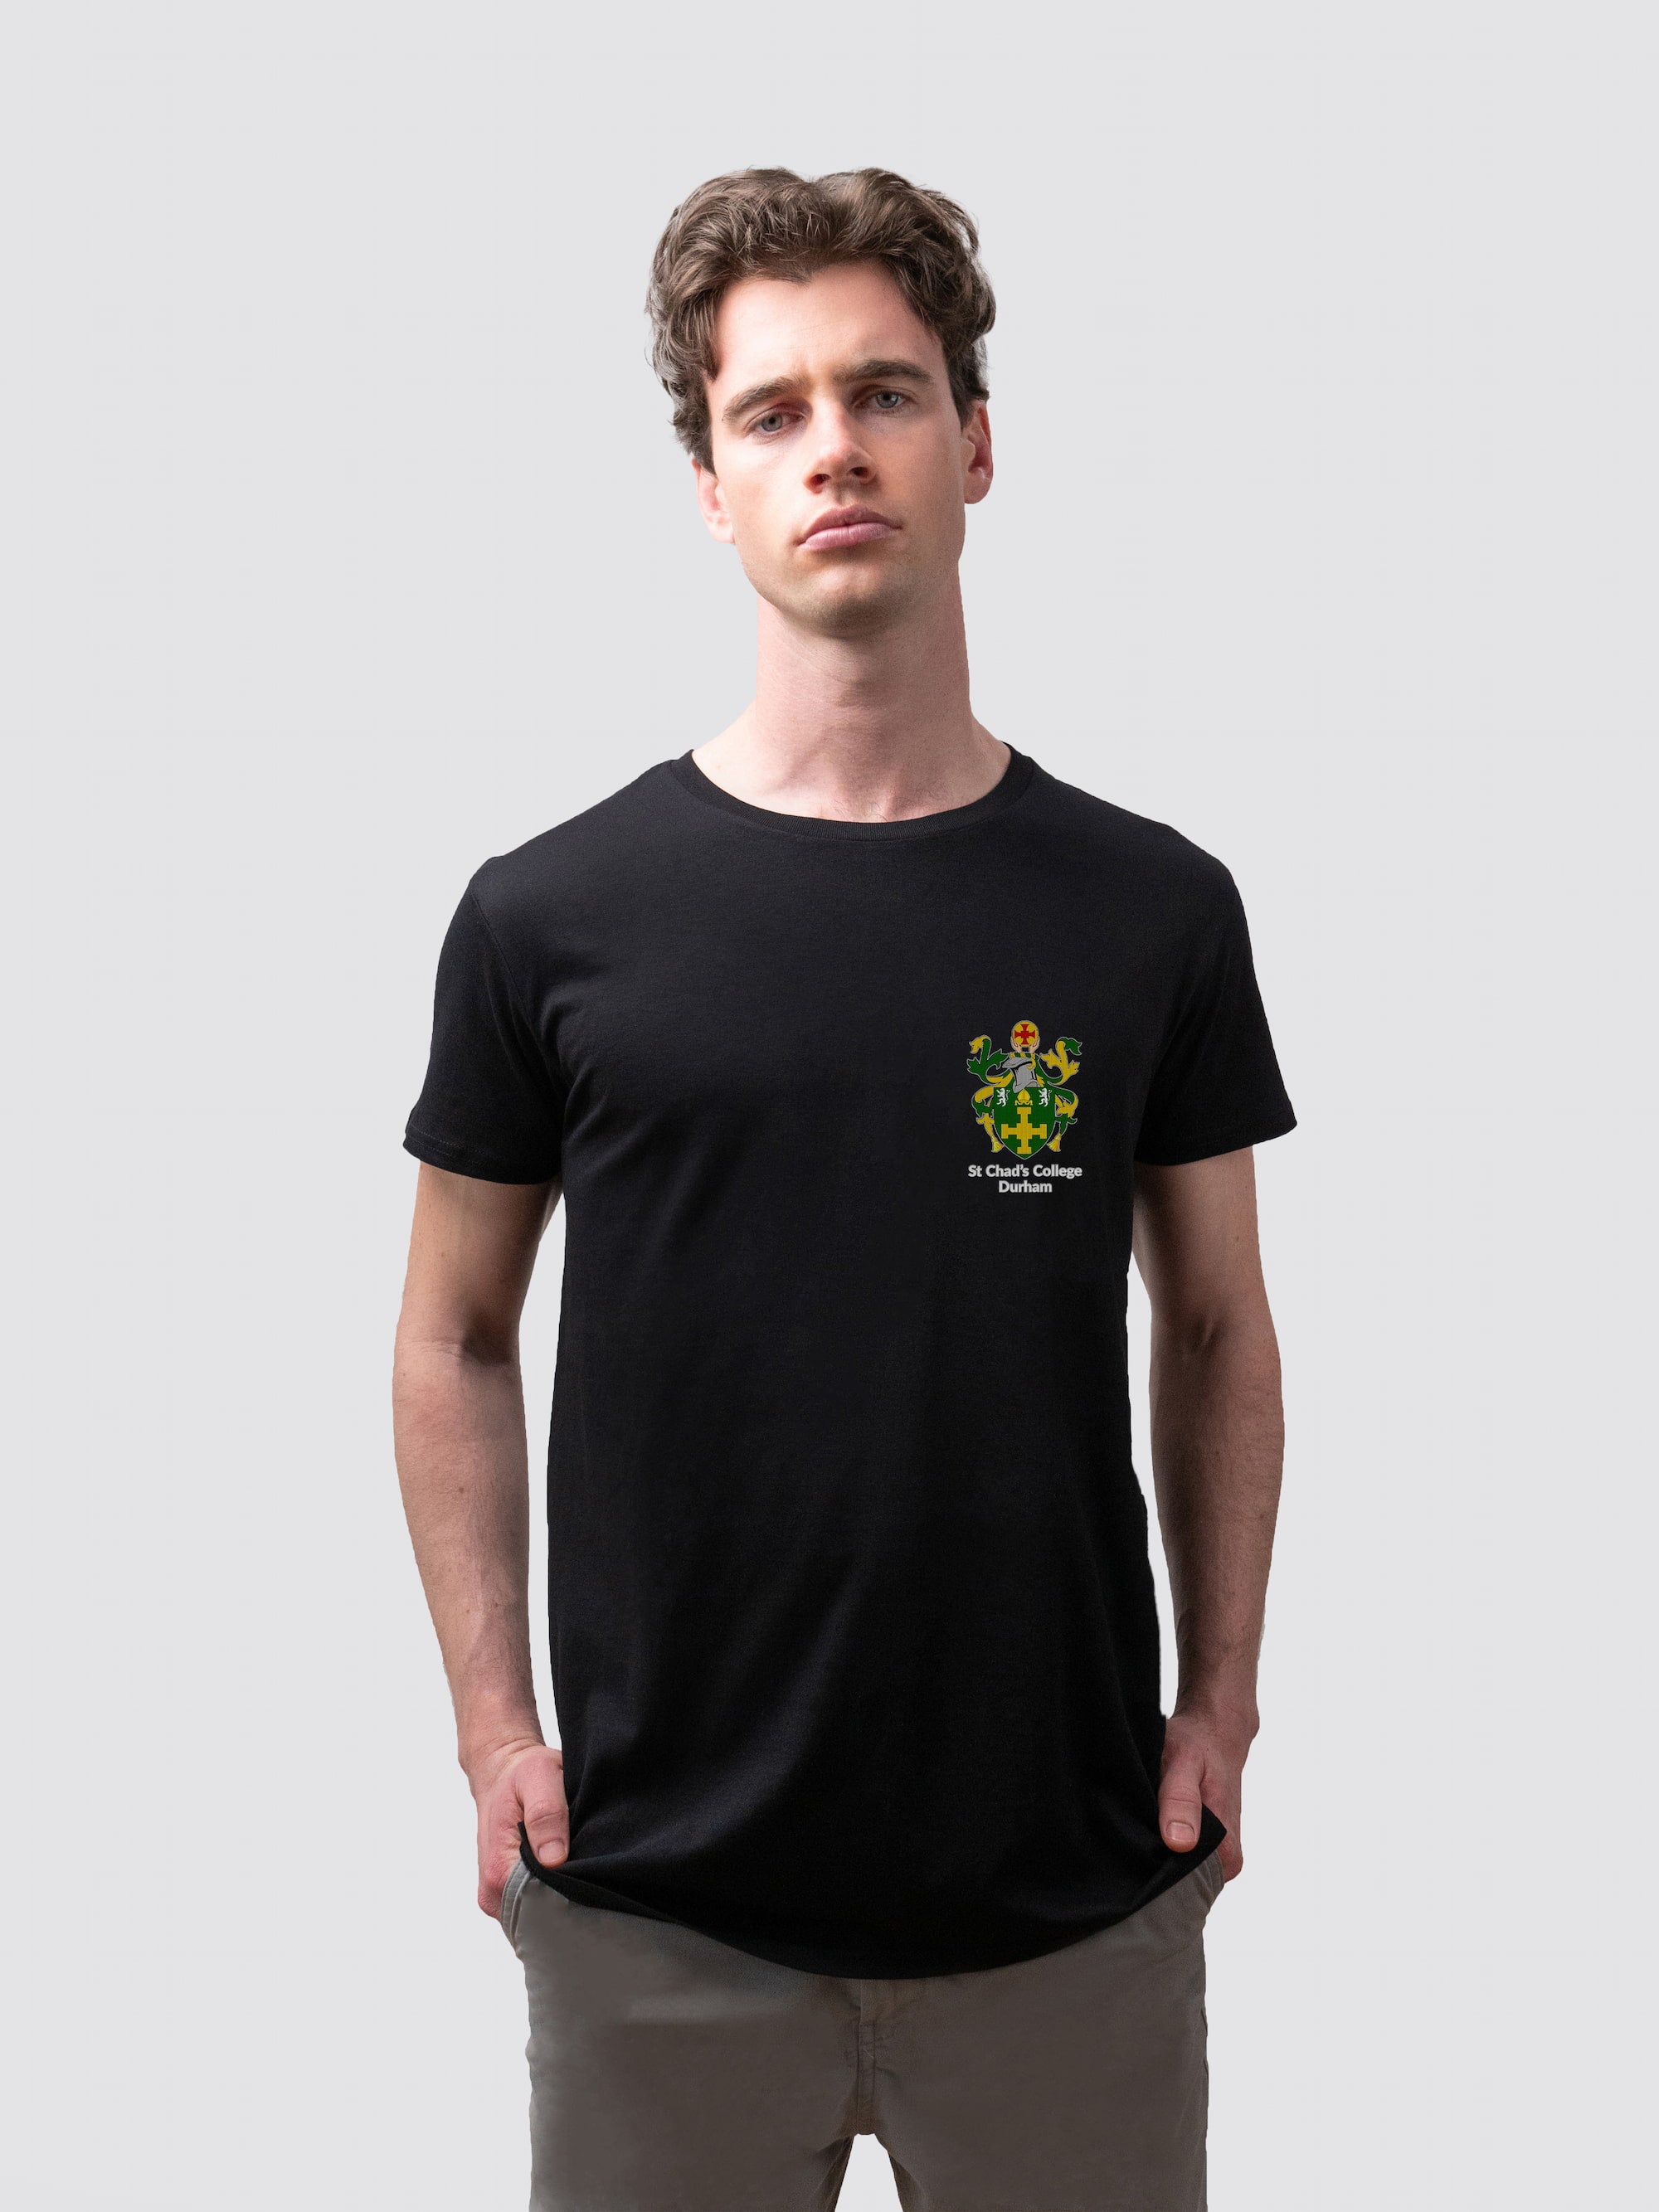 Sustainable St Chad's t-shirt, made from organic cotton